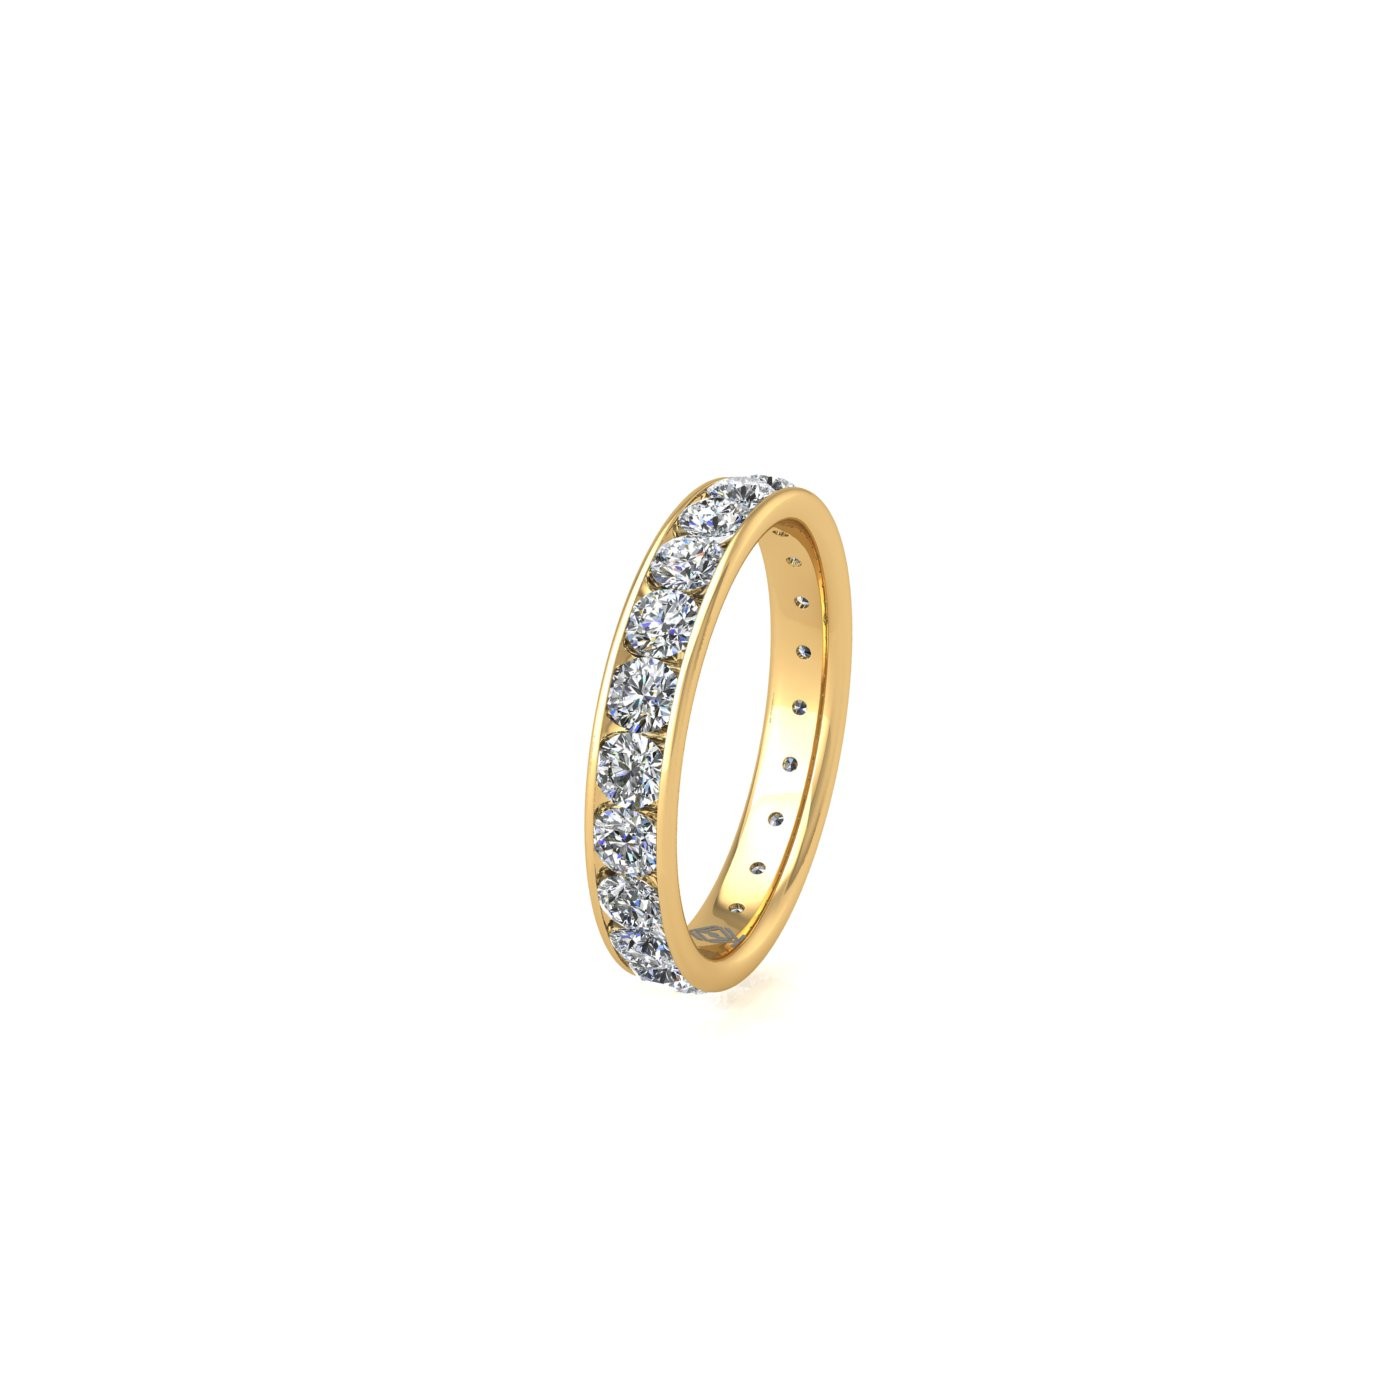 18k yellow gold diamond channel set full eternity ring Photos & images